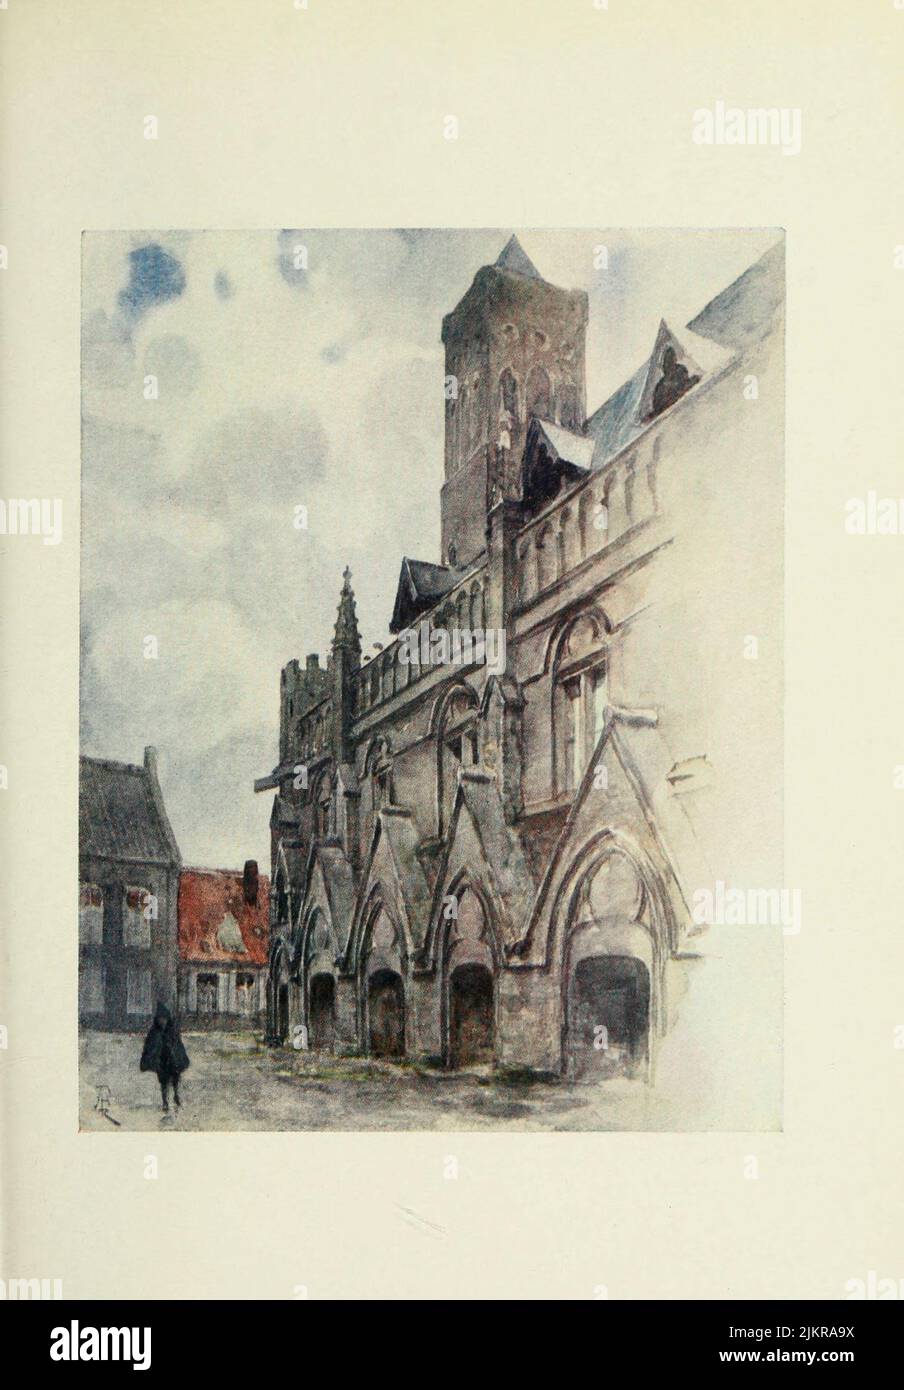 Nieuport The Town Hall Painted by Amedee Forestier, from the book '  Bruges and West Flanders ' by George William Thomson Omond, Publication date 1906 Publisher London : A. & C. Black Sir Amédée Forestier (Paris 1854 – 18 November 1930 London) was an Anglo-French artist and illustrator who specialised in historical and prehistoric scenes, and landscapes. Stock Photo